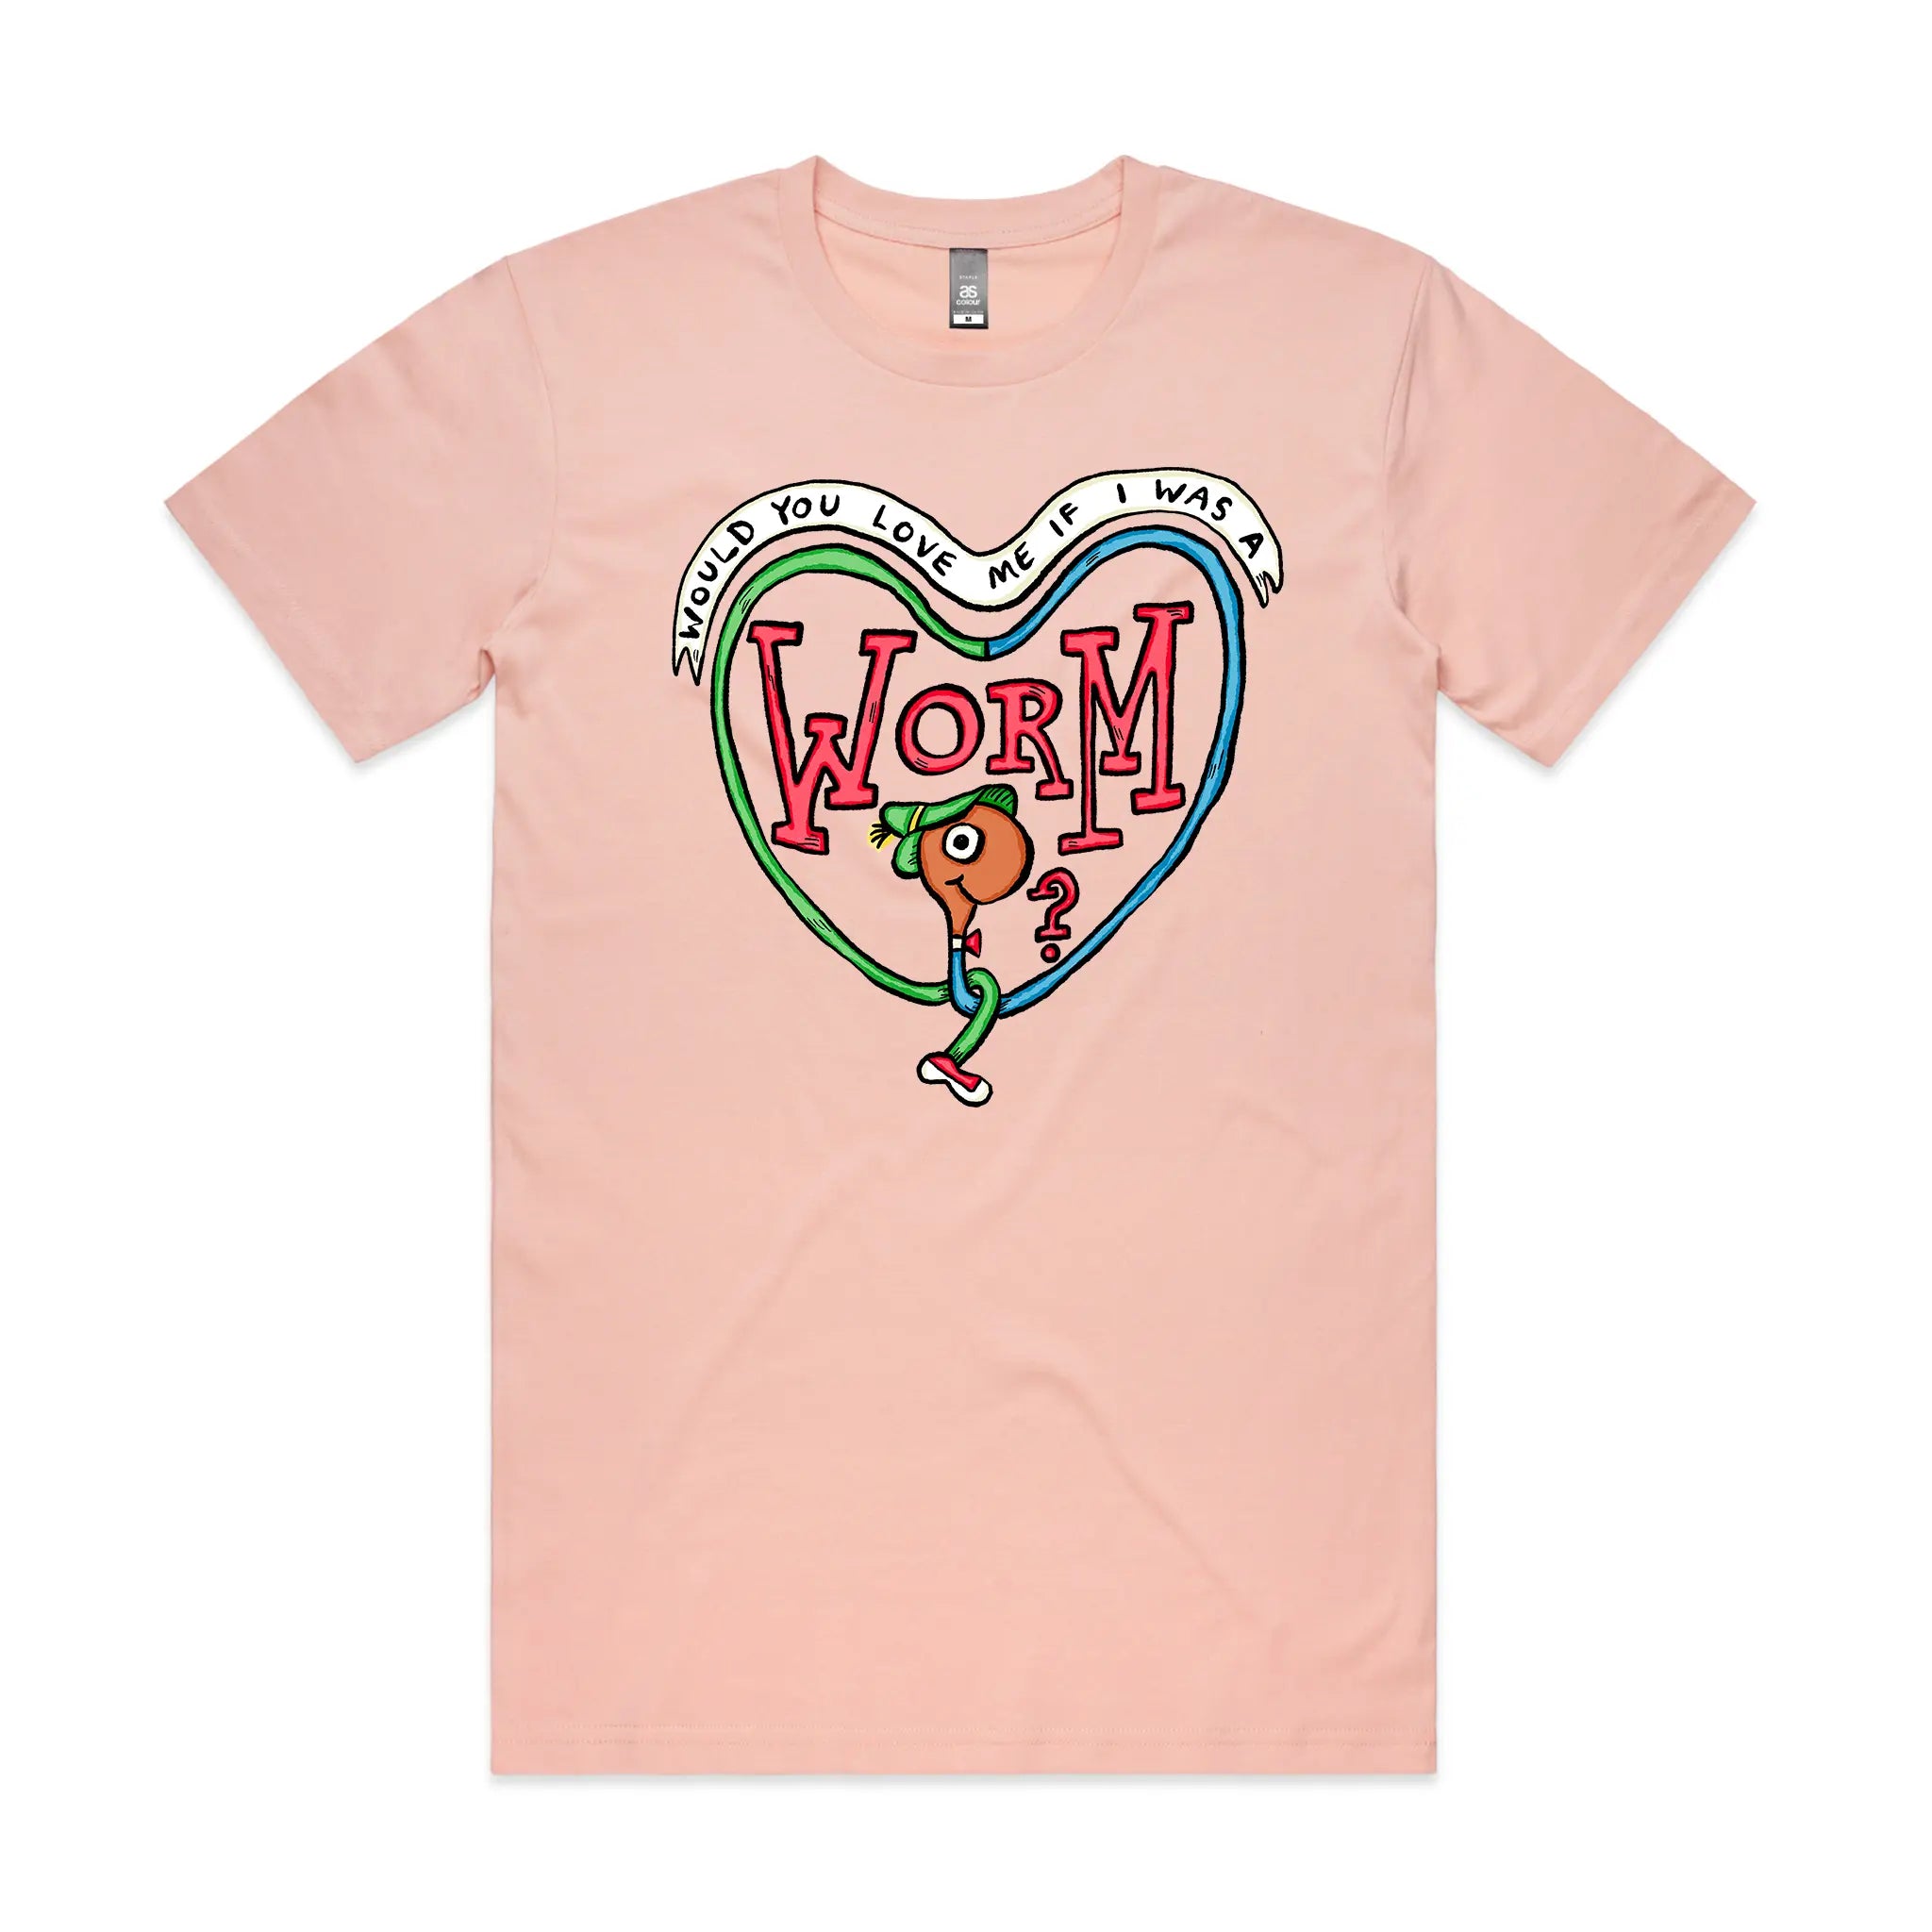 If I Was A Worm Tee